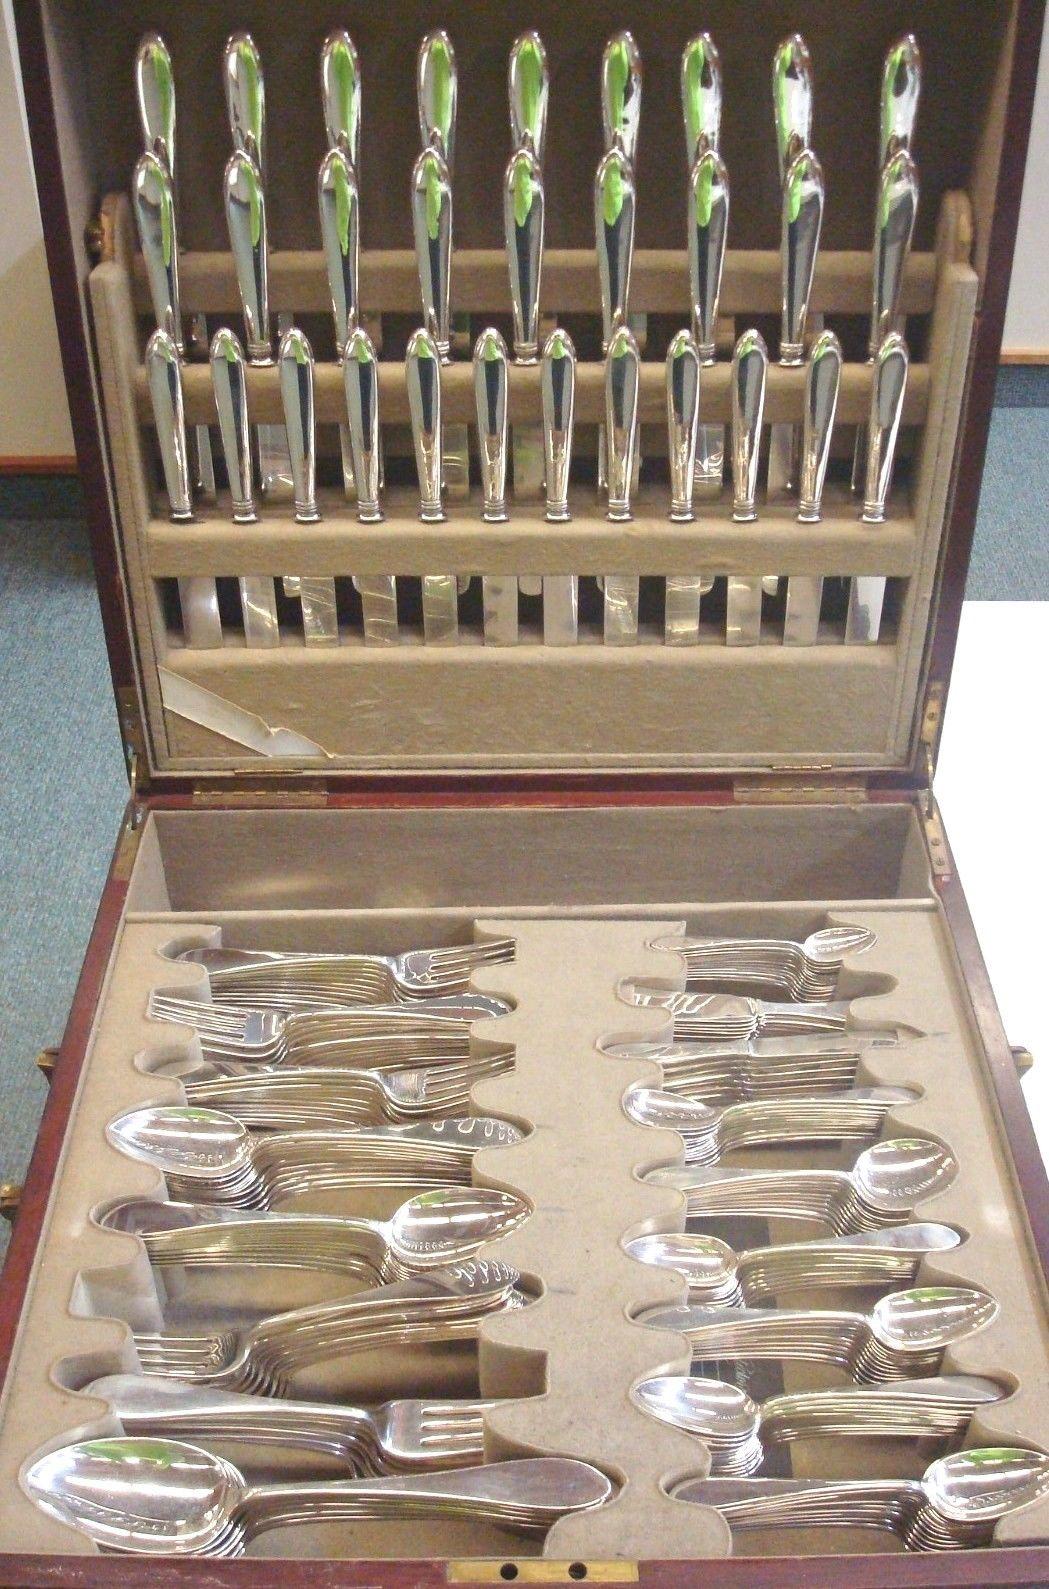 Monumental Pointed End by AJ Stone circa 1906 handmade sterling silver flatware set of 218 pieces. This set includes:

18 dinner size knives, 9 1/2